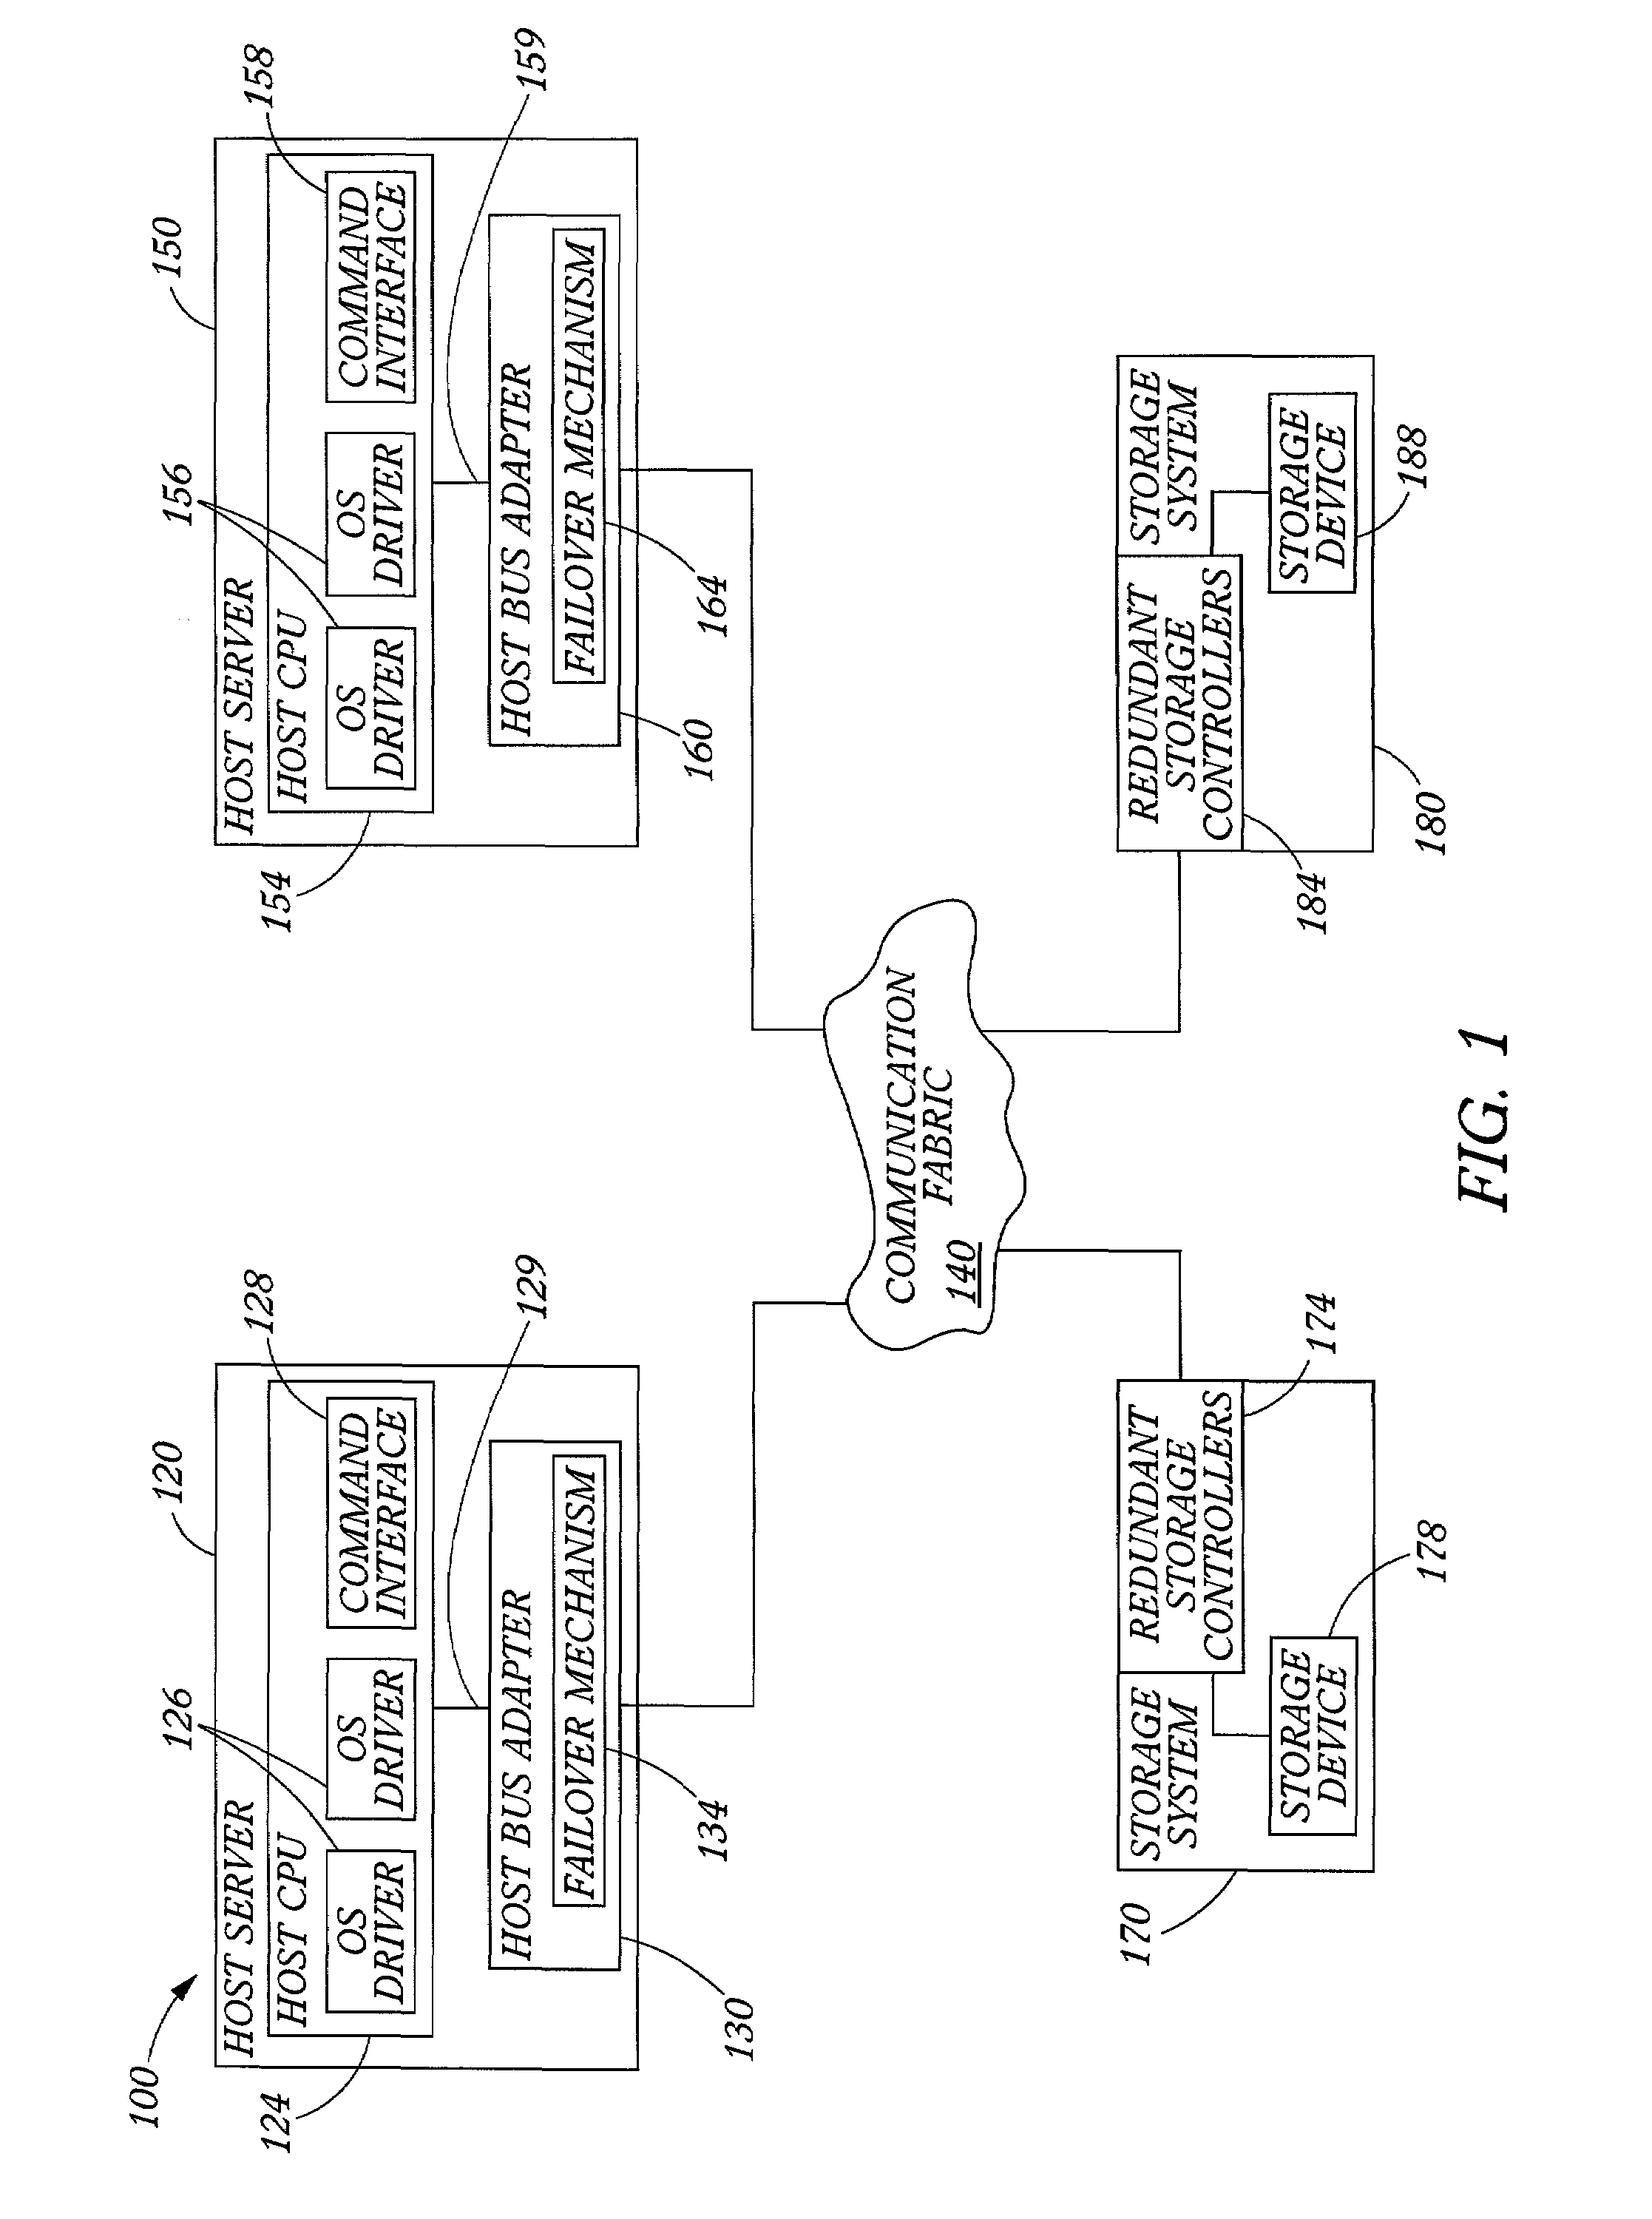 Data storage network with host transparent failover controlled by host bus adapter